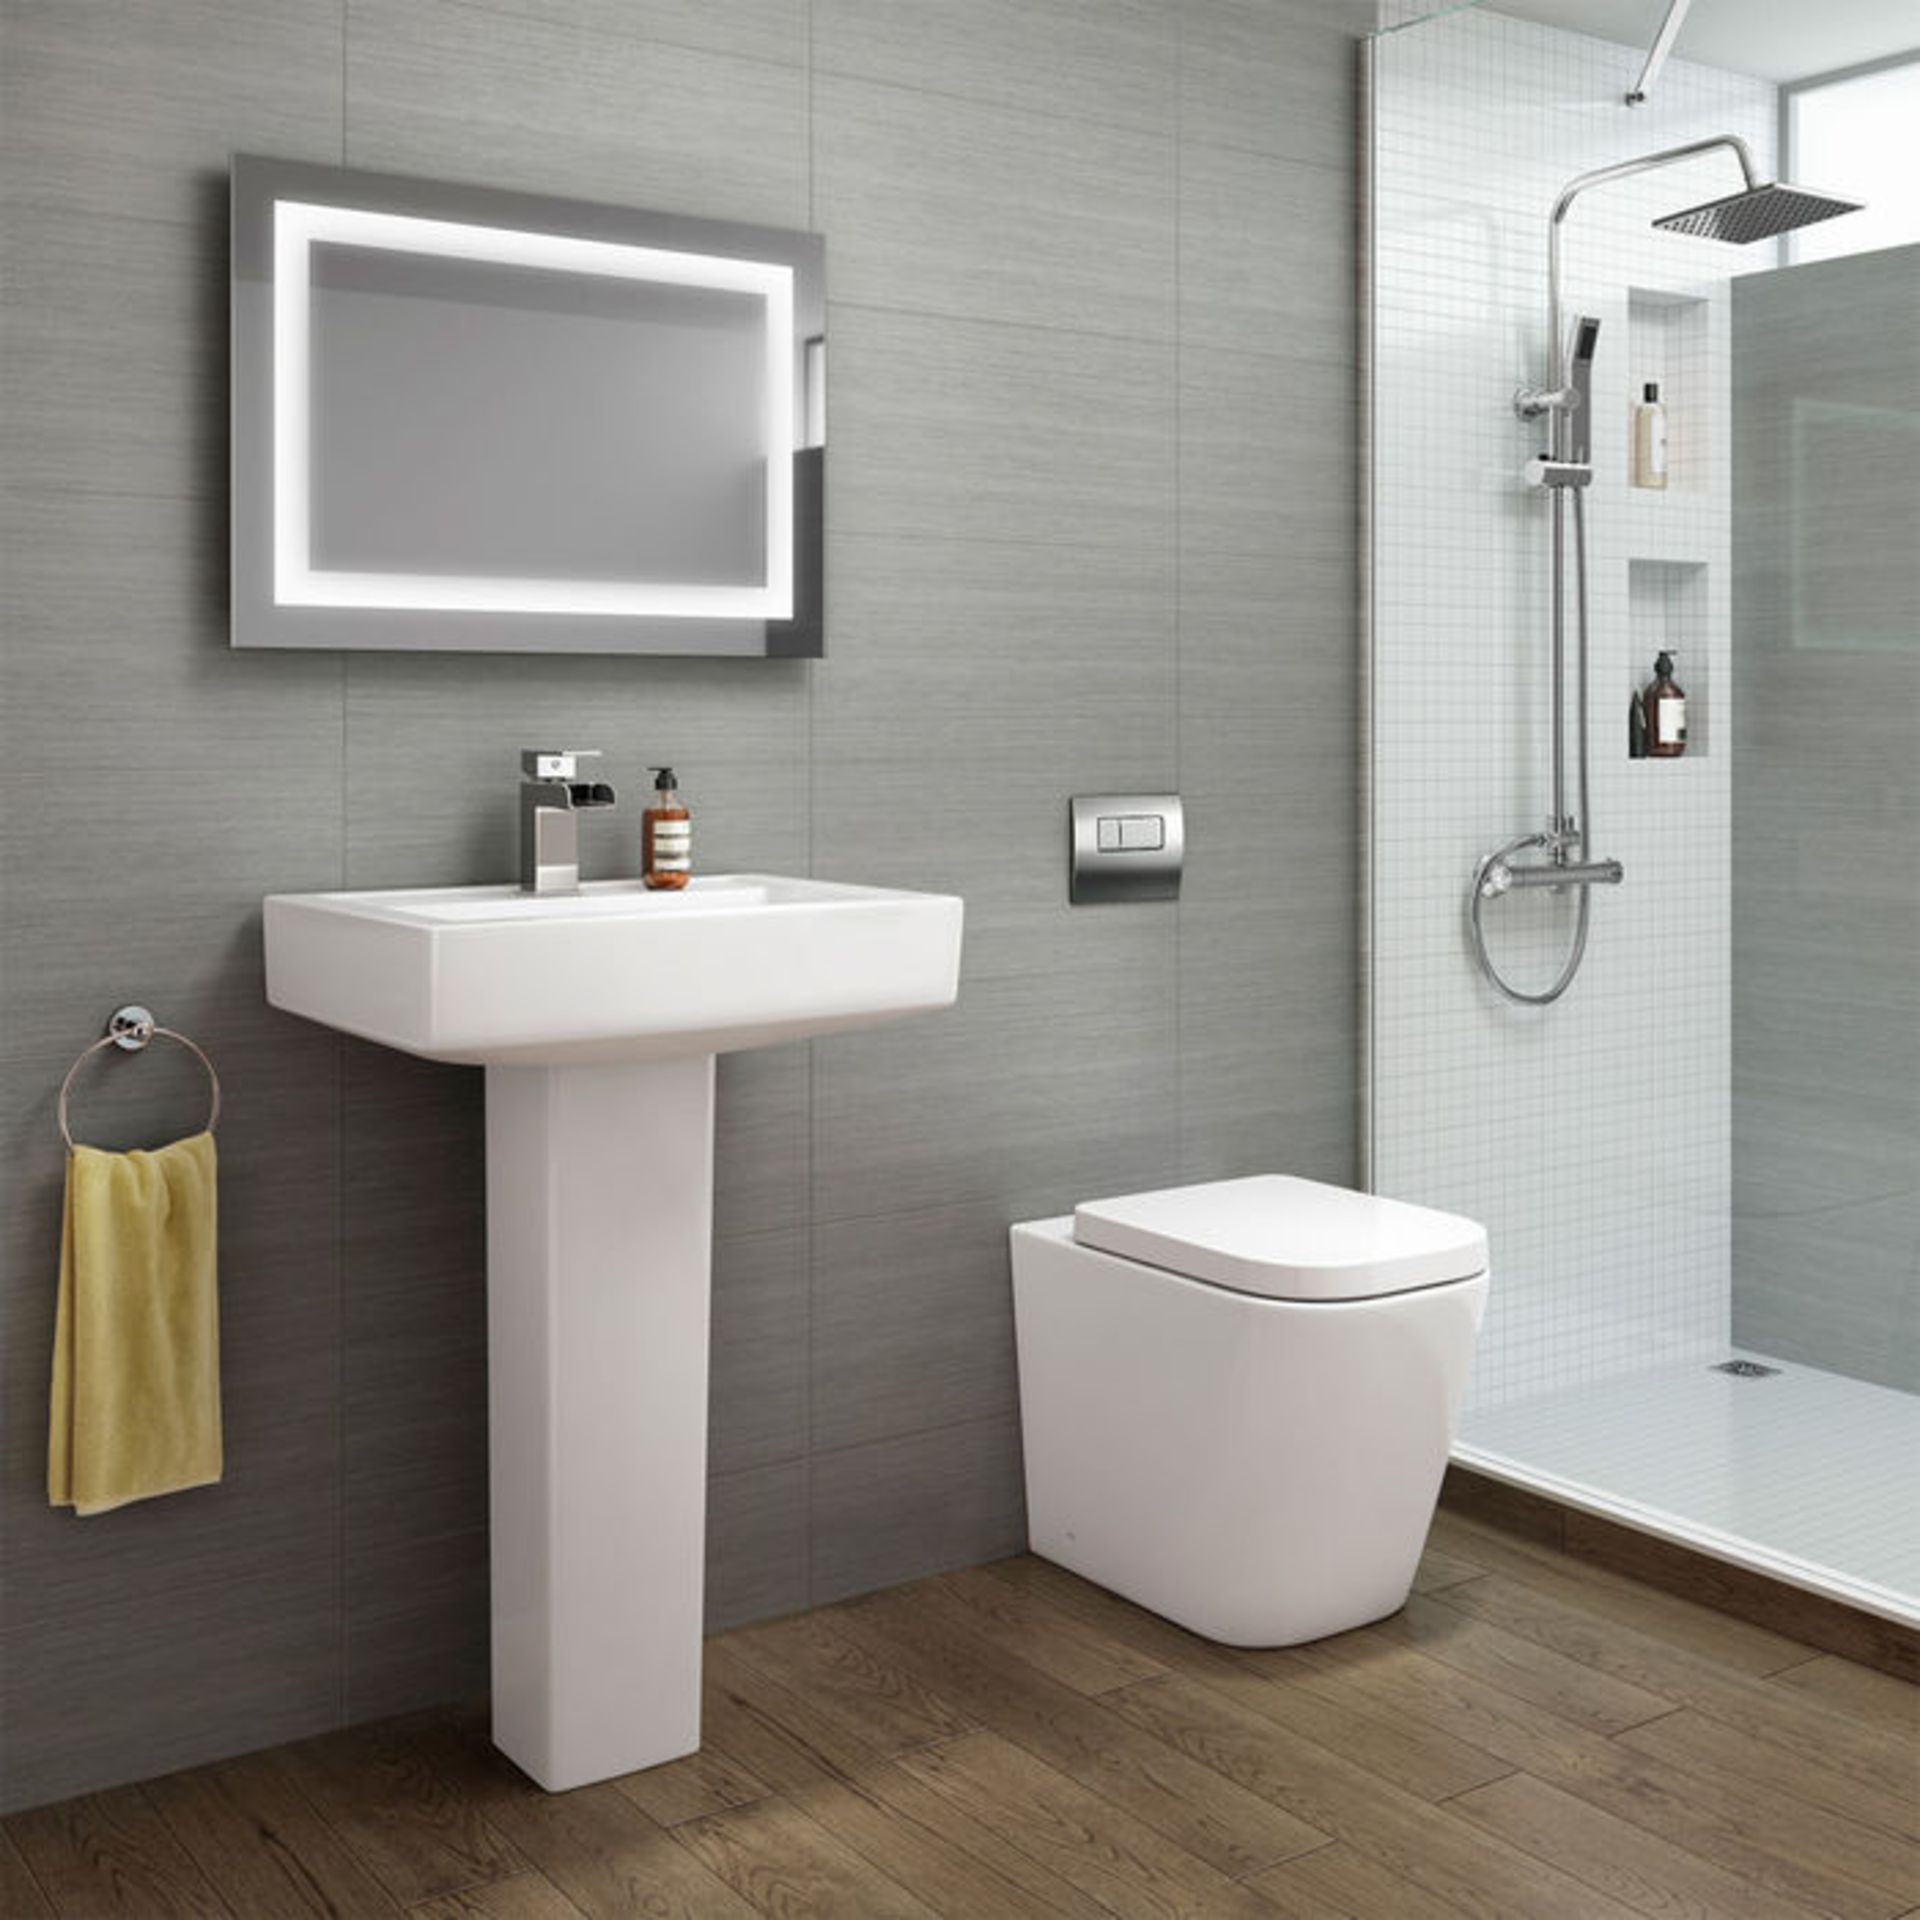 Florence Rimless Back to Wall Toilet inc Luxury Soft Close Seat. Rimless design makes it easy t... - Image 2 of 3